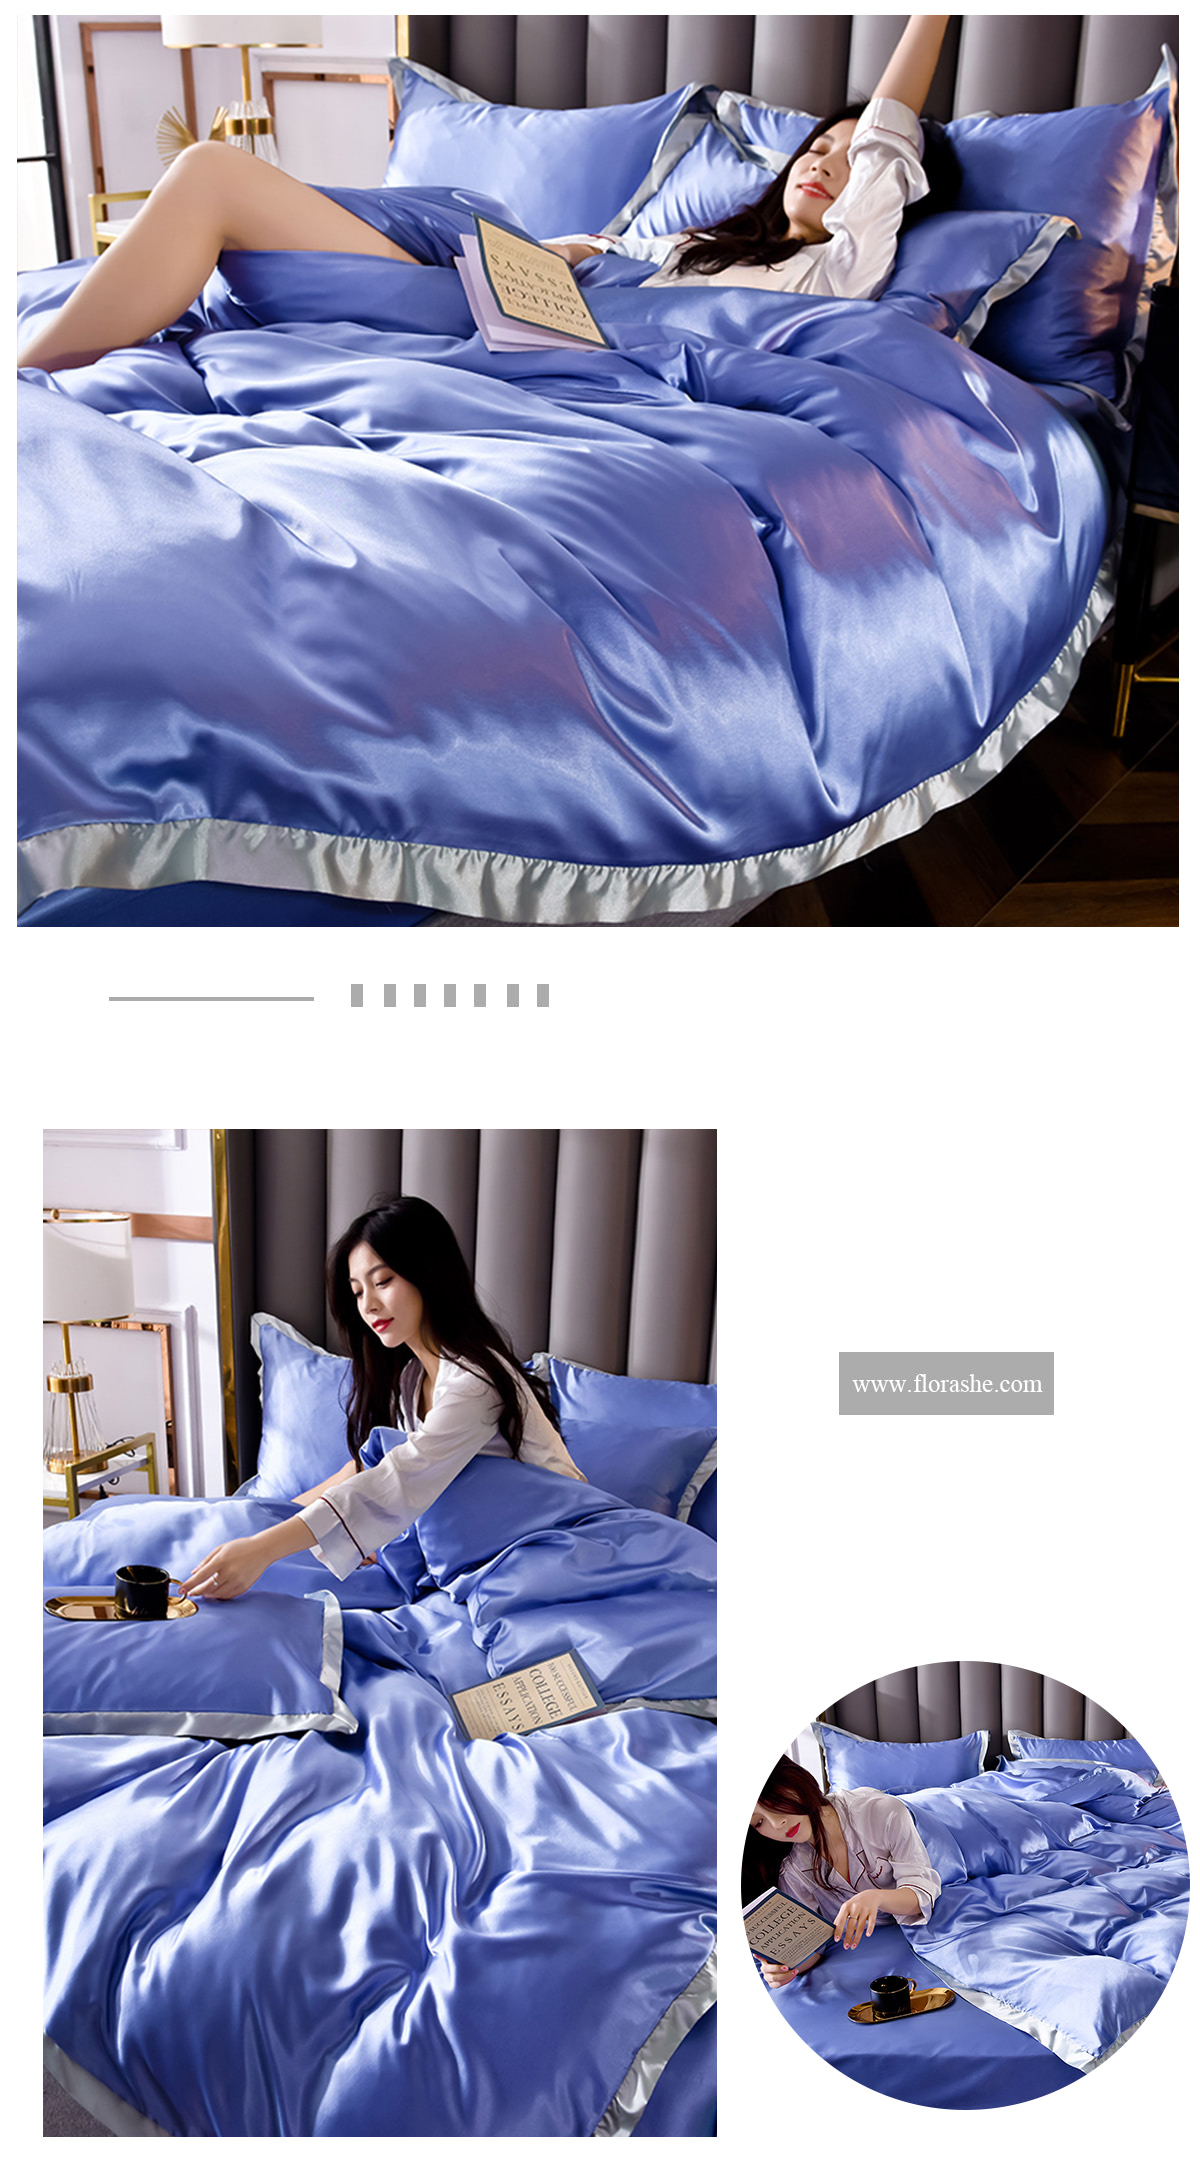 Fresh-and-Soft-Comfortable-Satin-Bed-Cover-Sheet-Set14.jpg